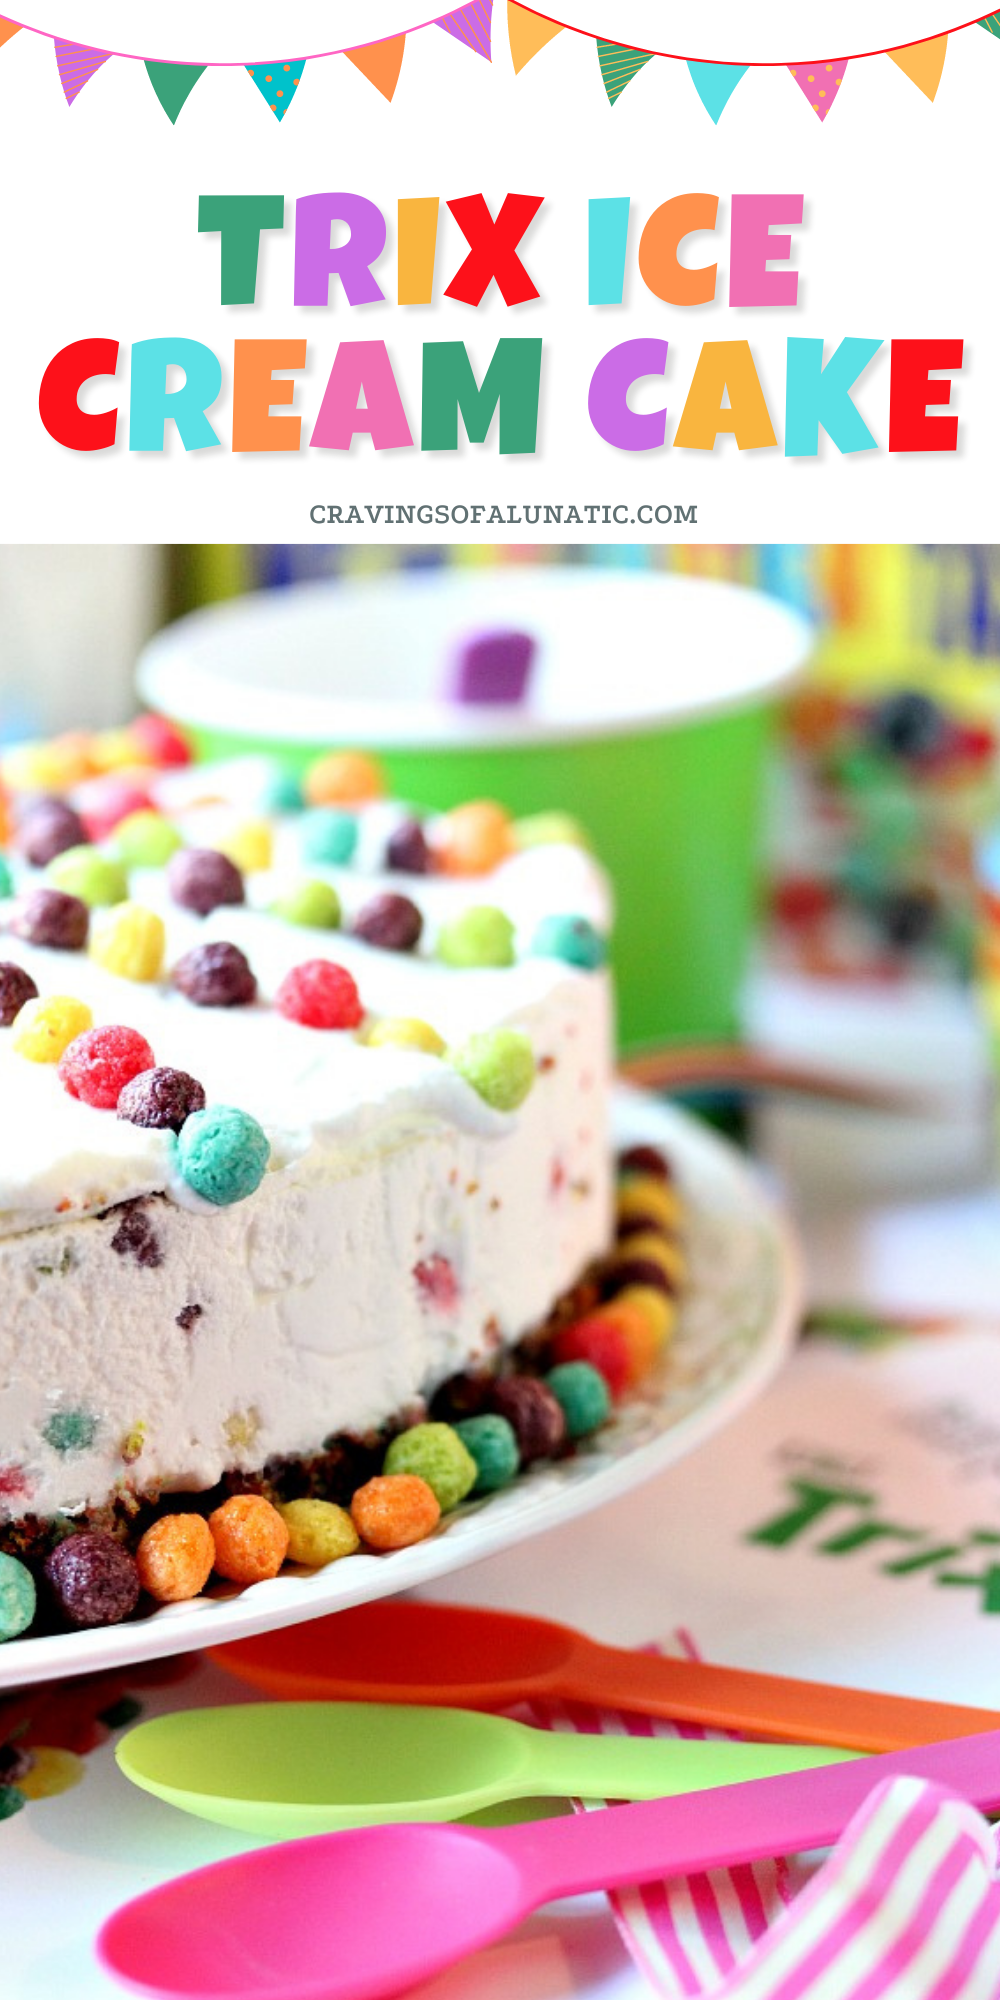 Trix ice cream cake served with party decorations all around